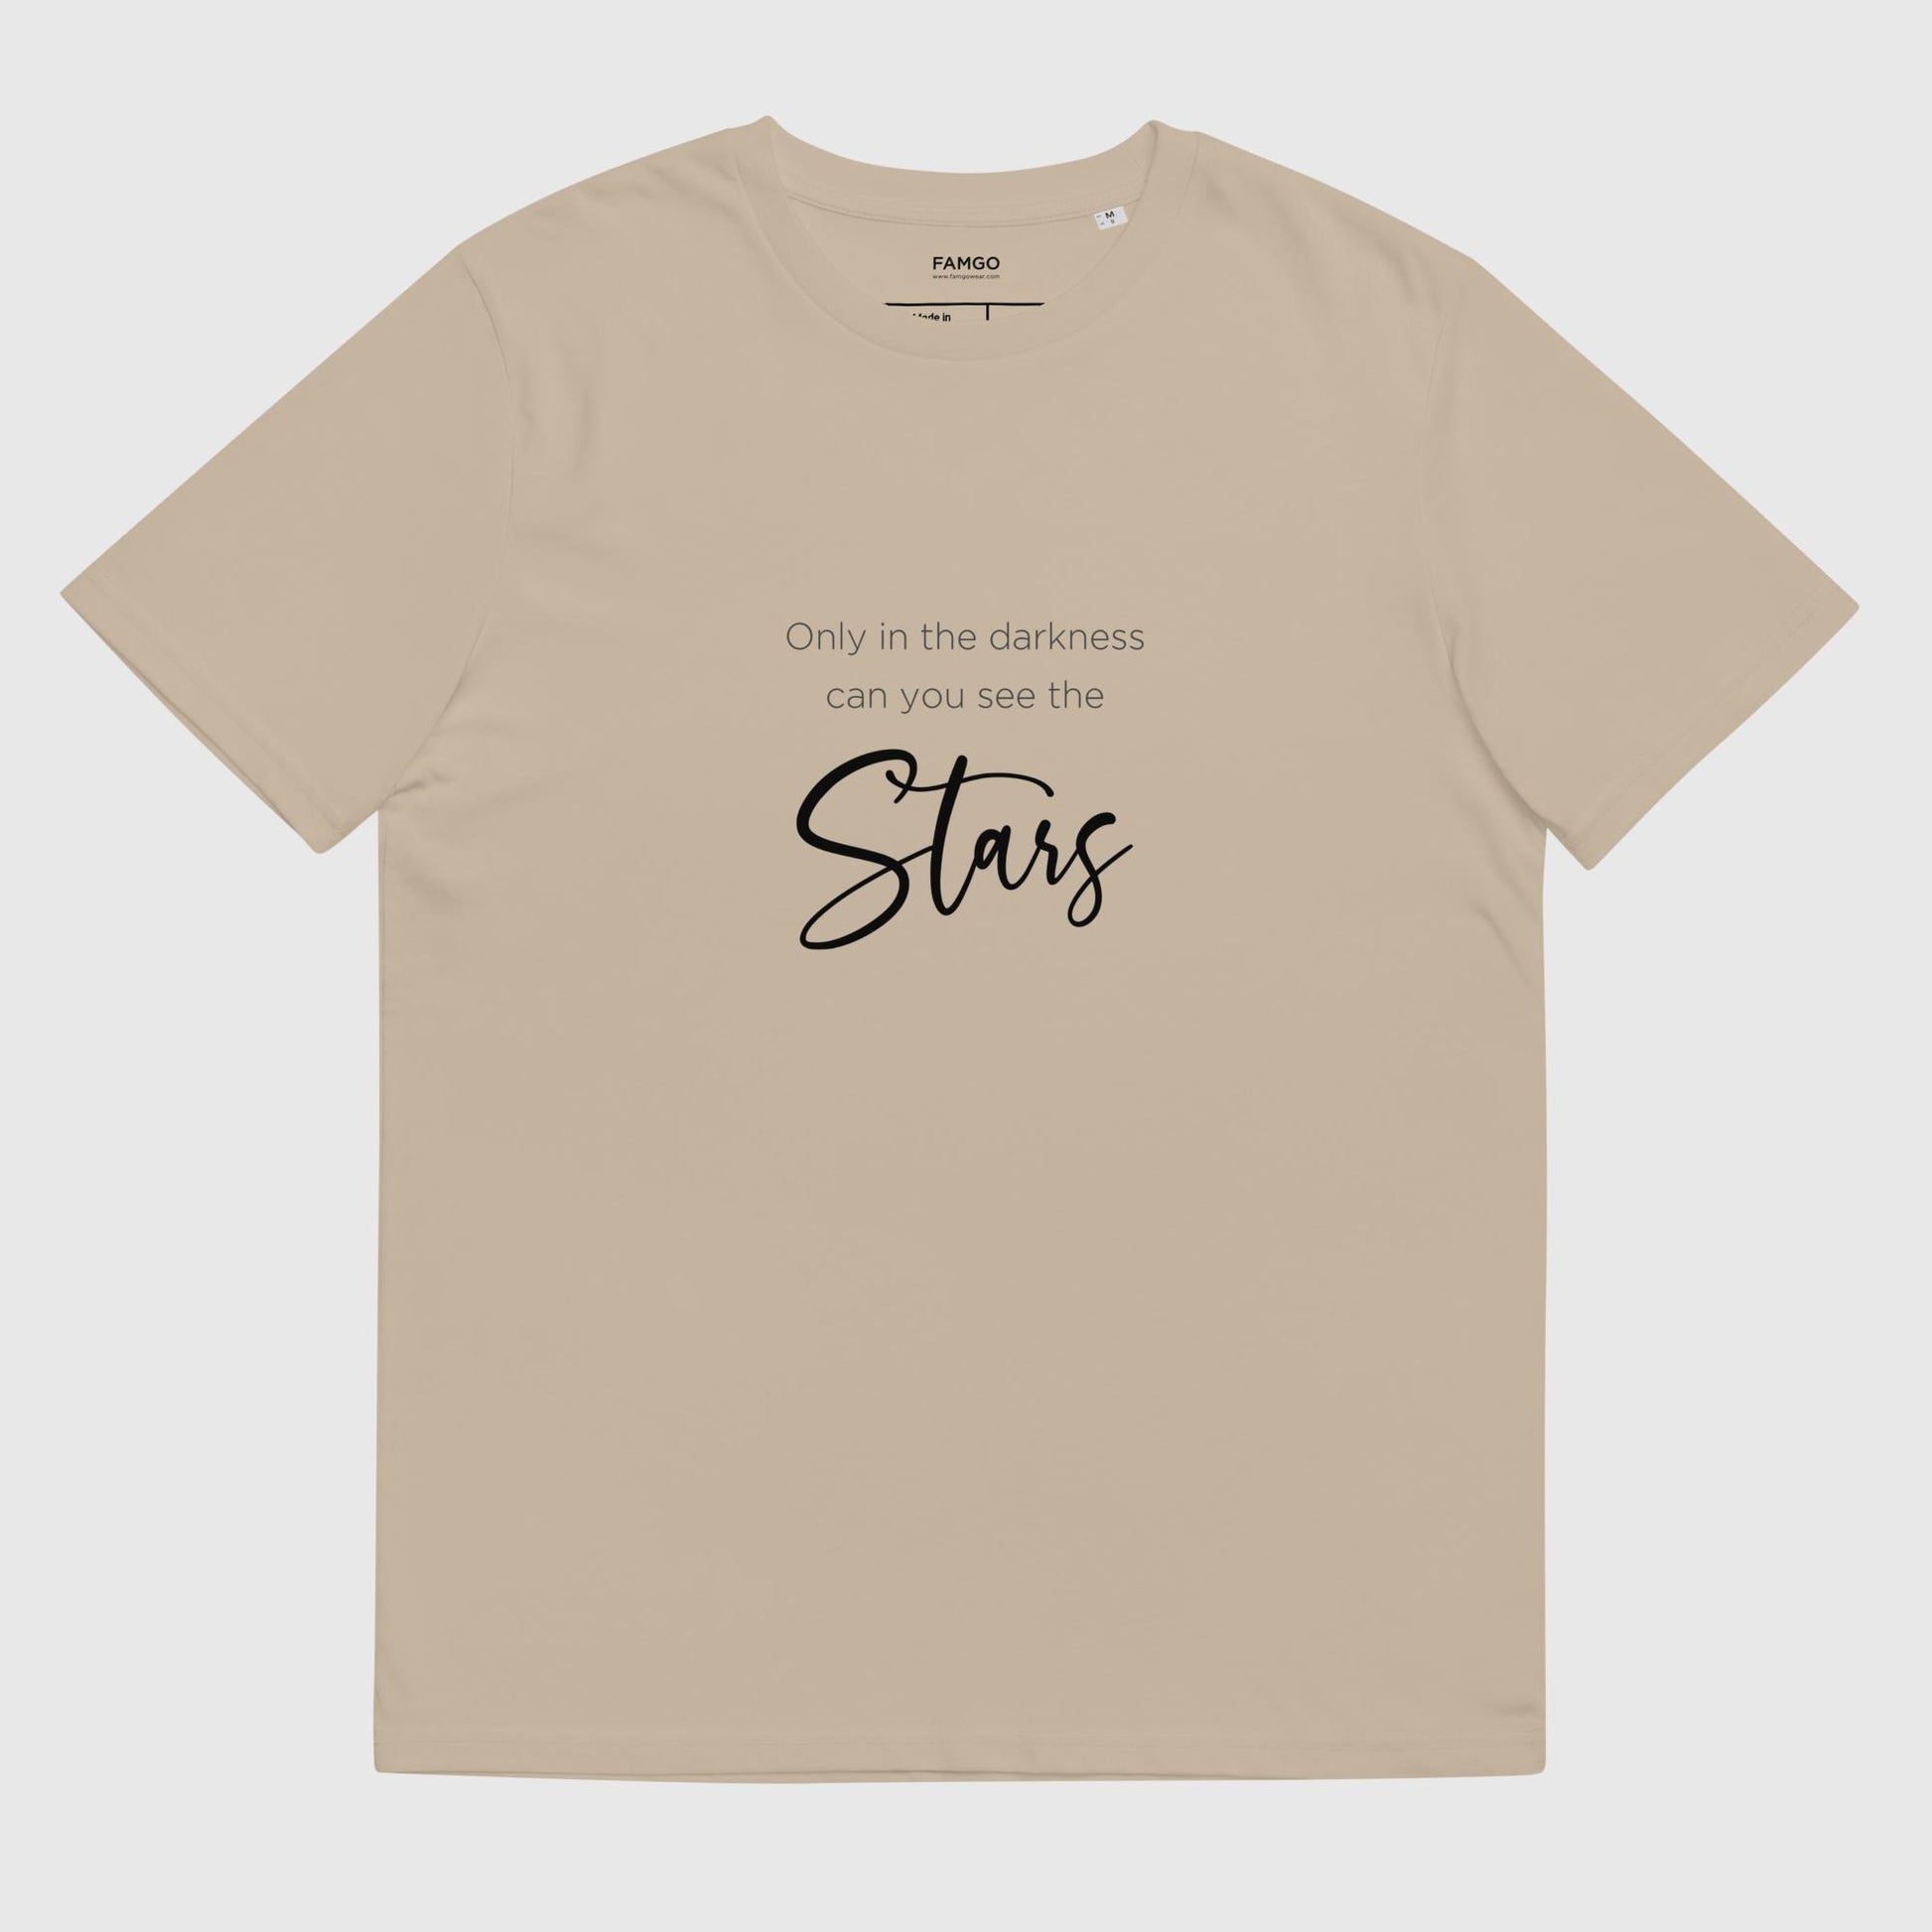 Men's desert dust organic cotton t-shirt that features Dr. Martin Luther King Jr's inspirational quote, "Only In The Darkness Can You See The Stars."